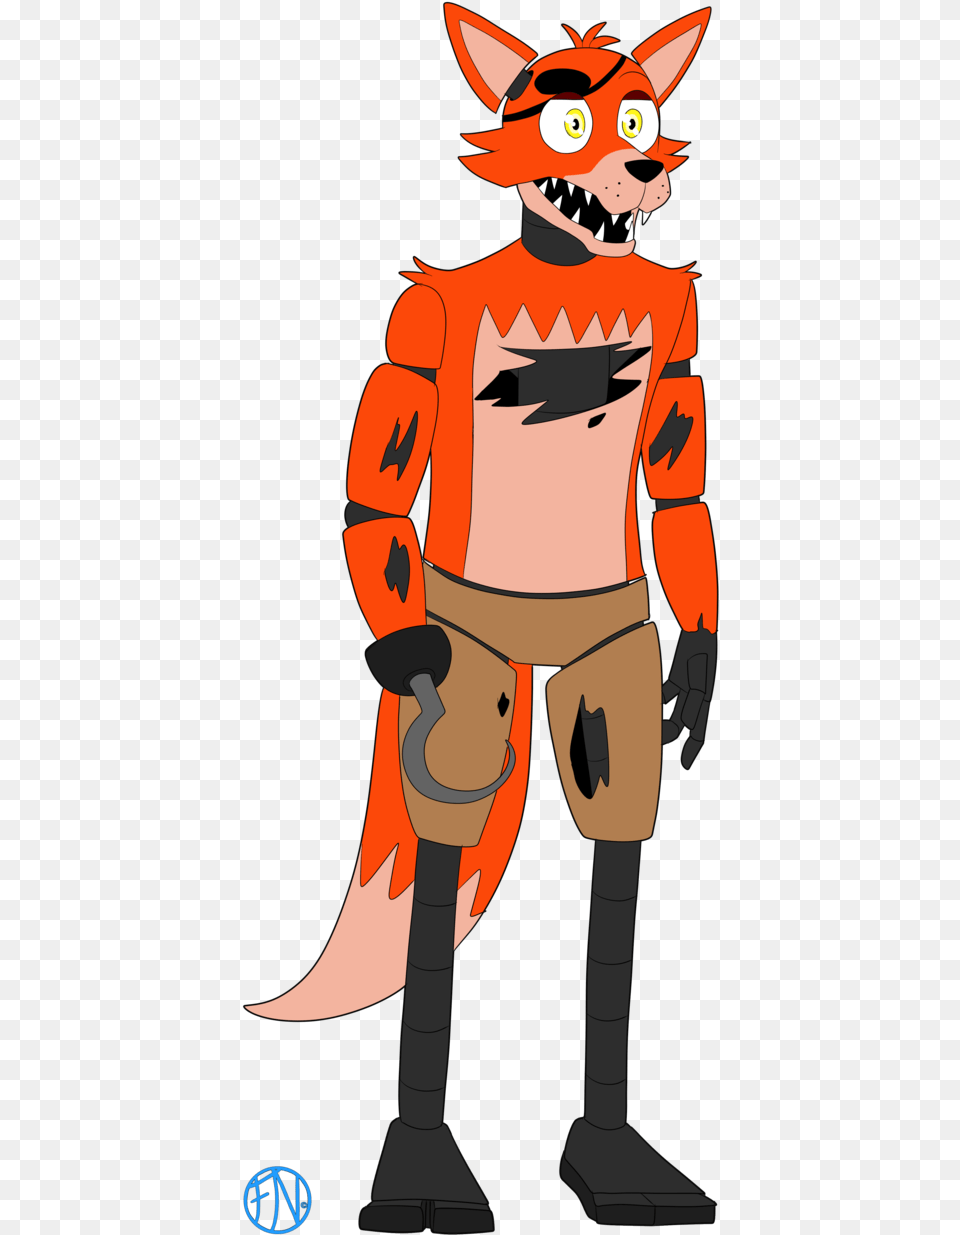 Foxy The Pirate By Fnafnations Fnaf 5 Fnaf Night Guards Imagens De Fnaf, Book, Comics, Publication, Person Free Png